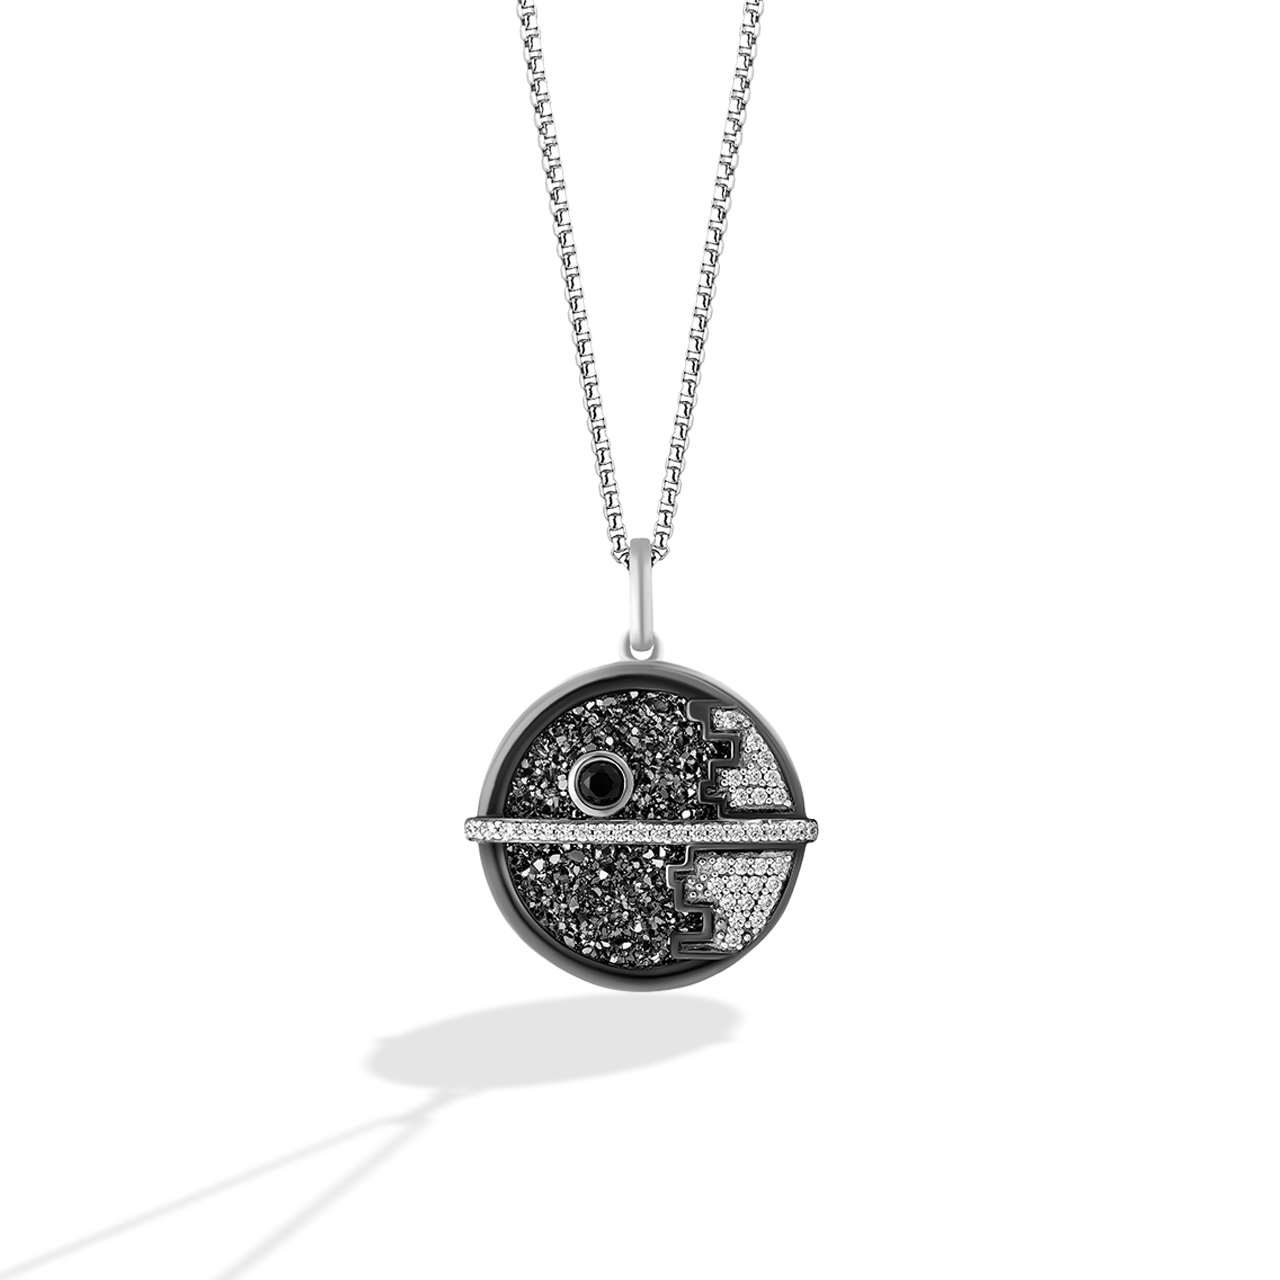 Star Wars Jewelry Unisex Boba Fett Helmet Stainless Steel and Black  Ion-Plated Pendant Necklace, 24